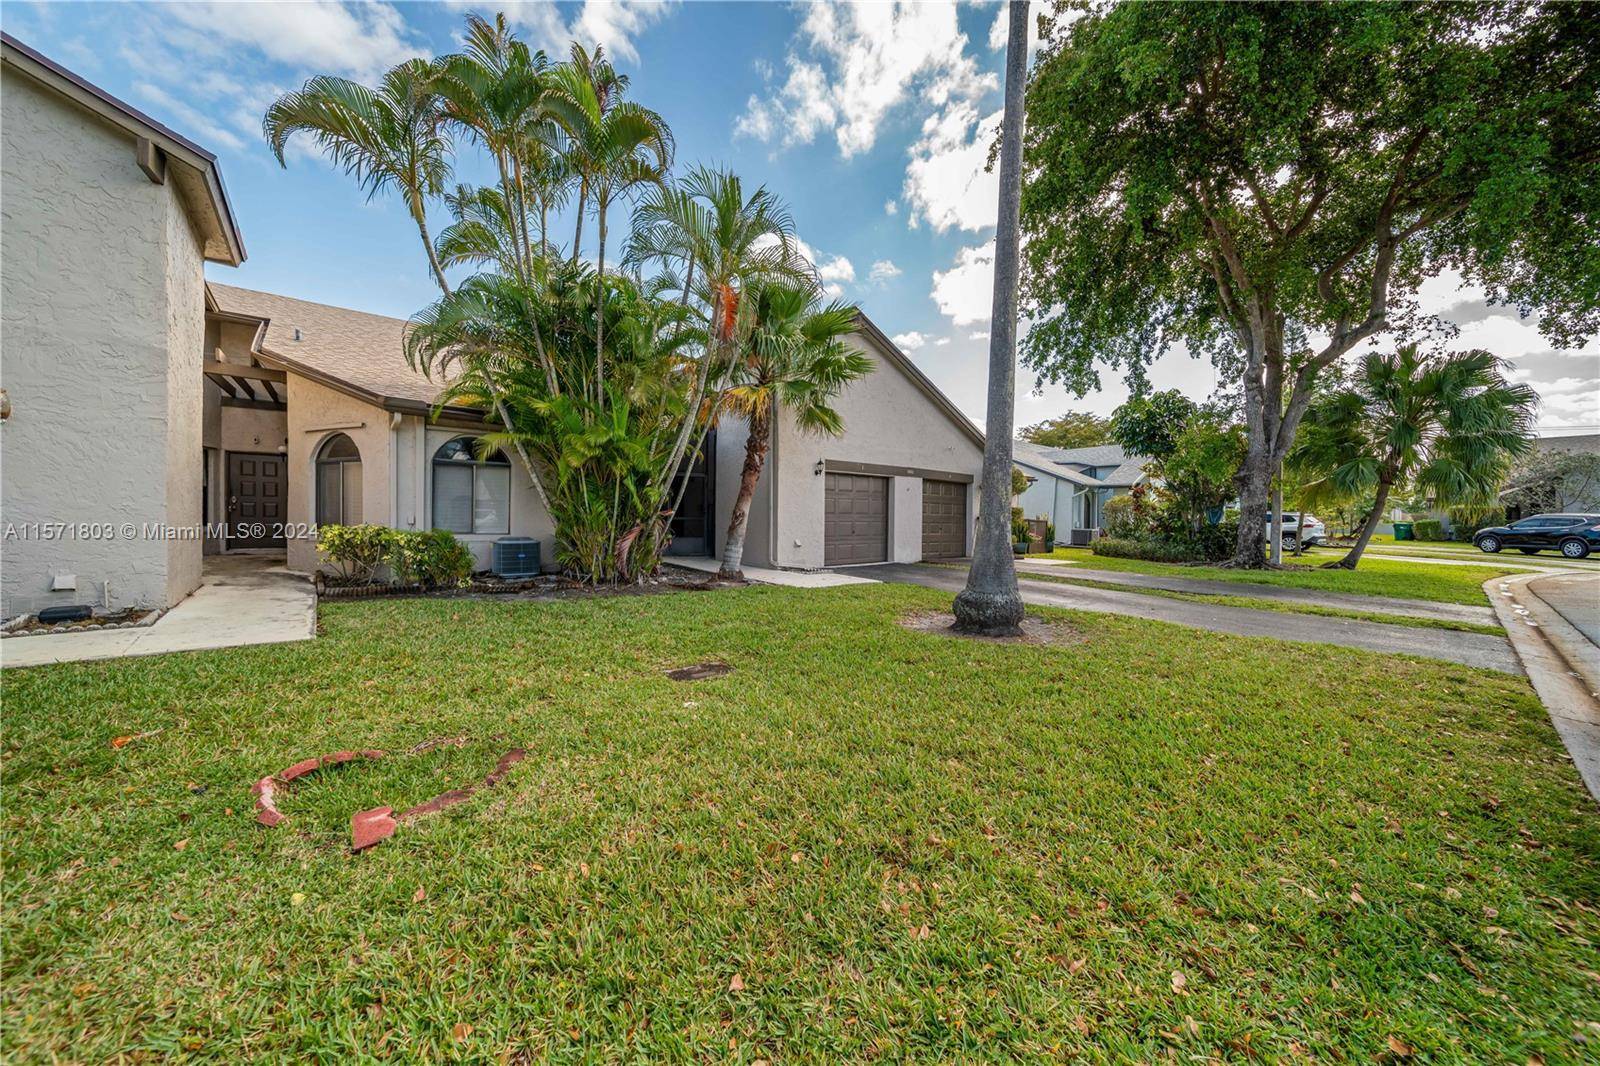 Spacious Villa in a great location minutes from the Sawgrass Expressway to the west and all the shops restaurants on University Drive to the east.